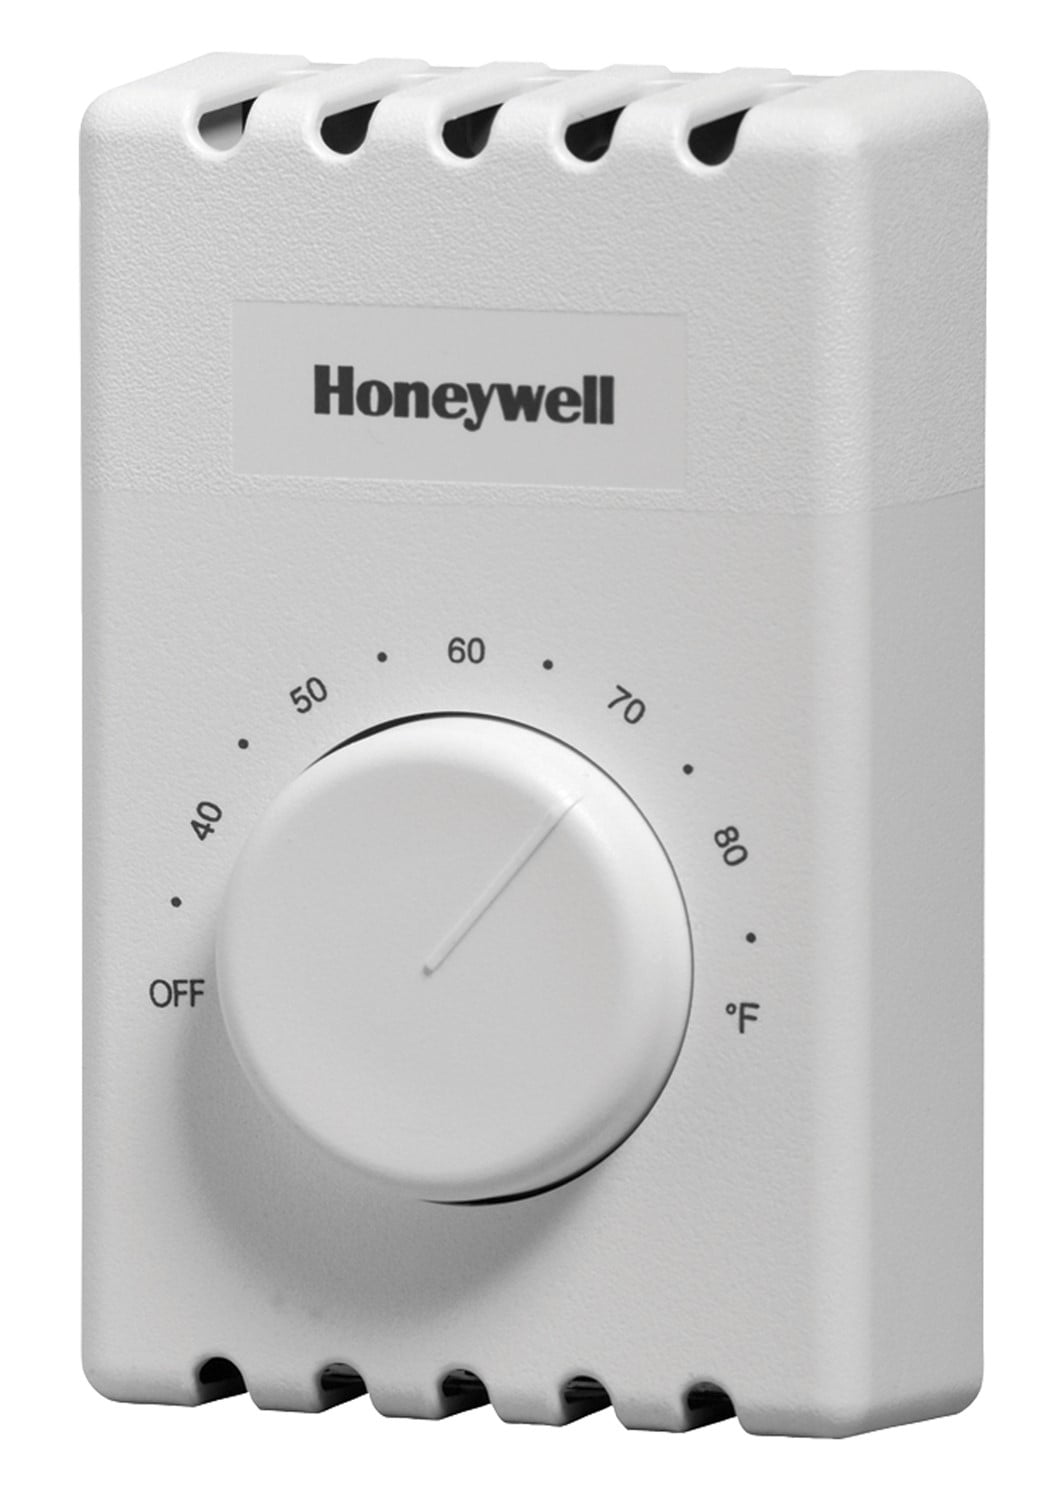 Honeywell Thermostats Manual Electric